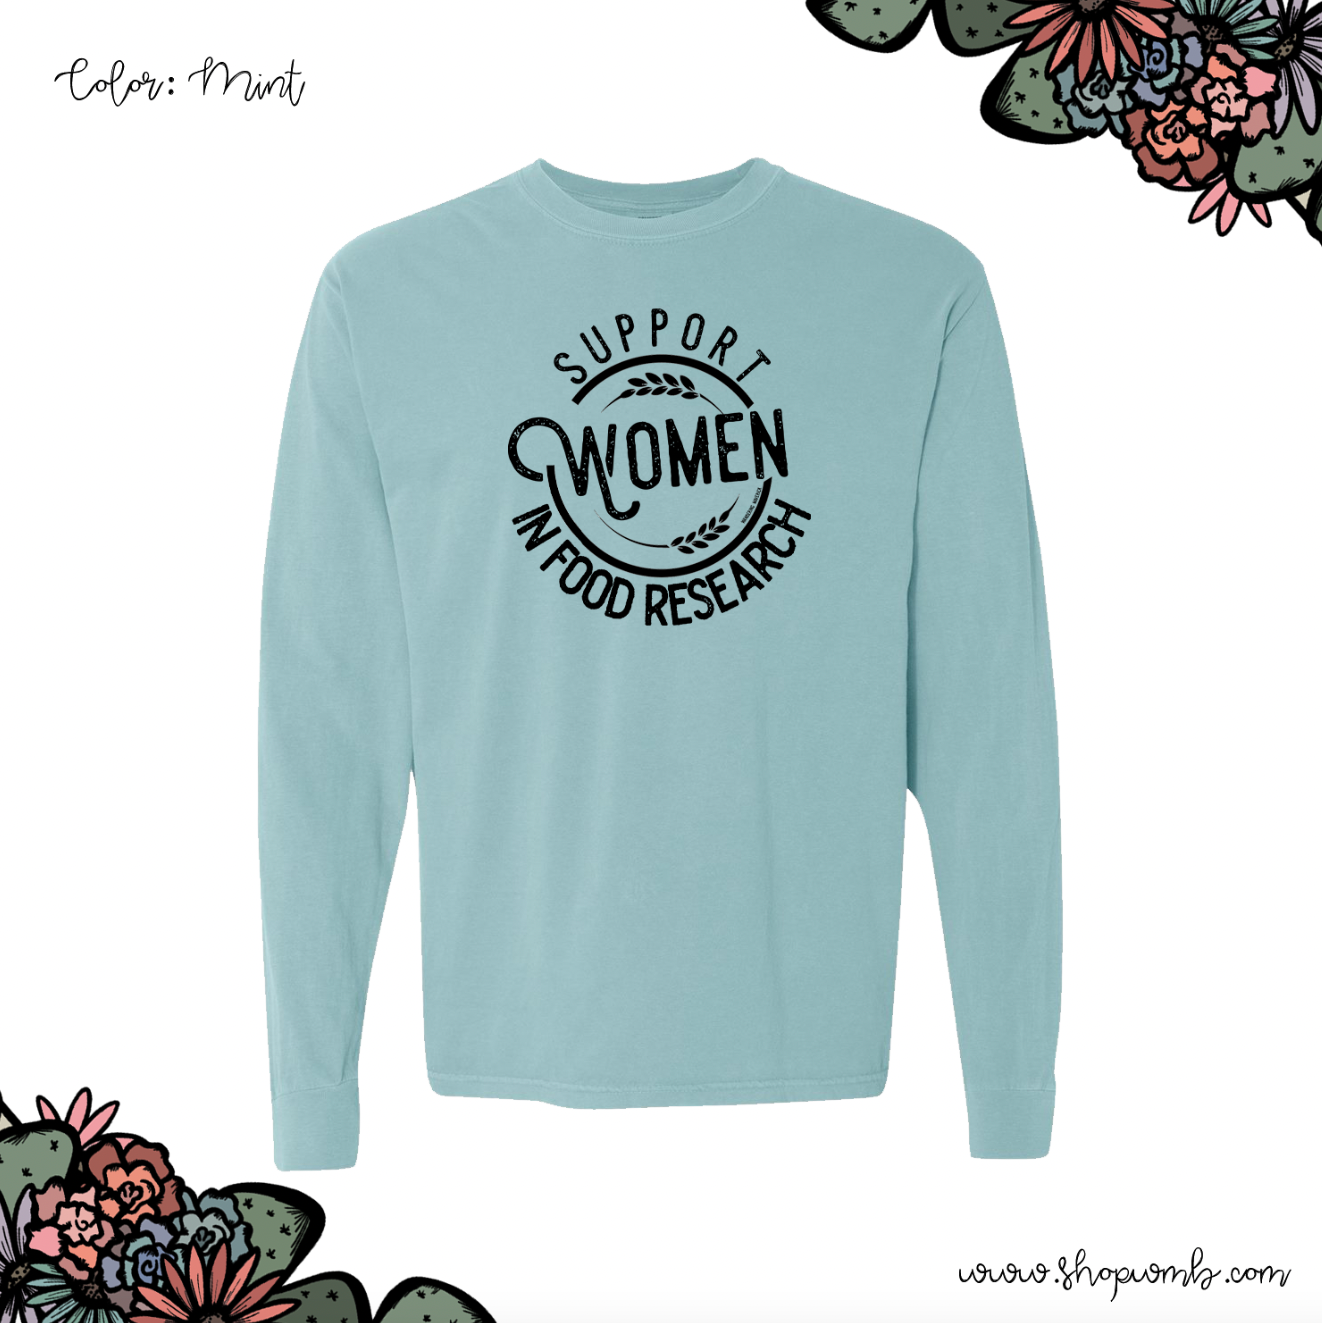 Support Women In Food Research LONG SLEEVE T-Shirt (S-3XL) - Multiple Colors!